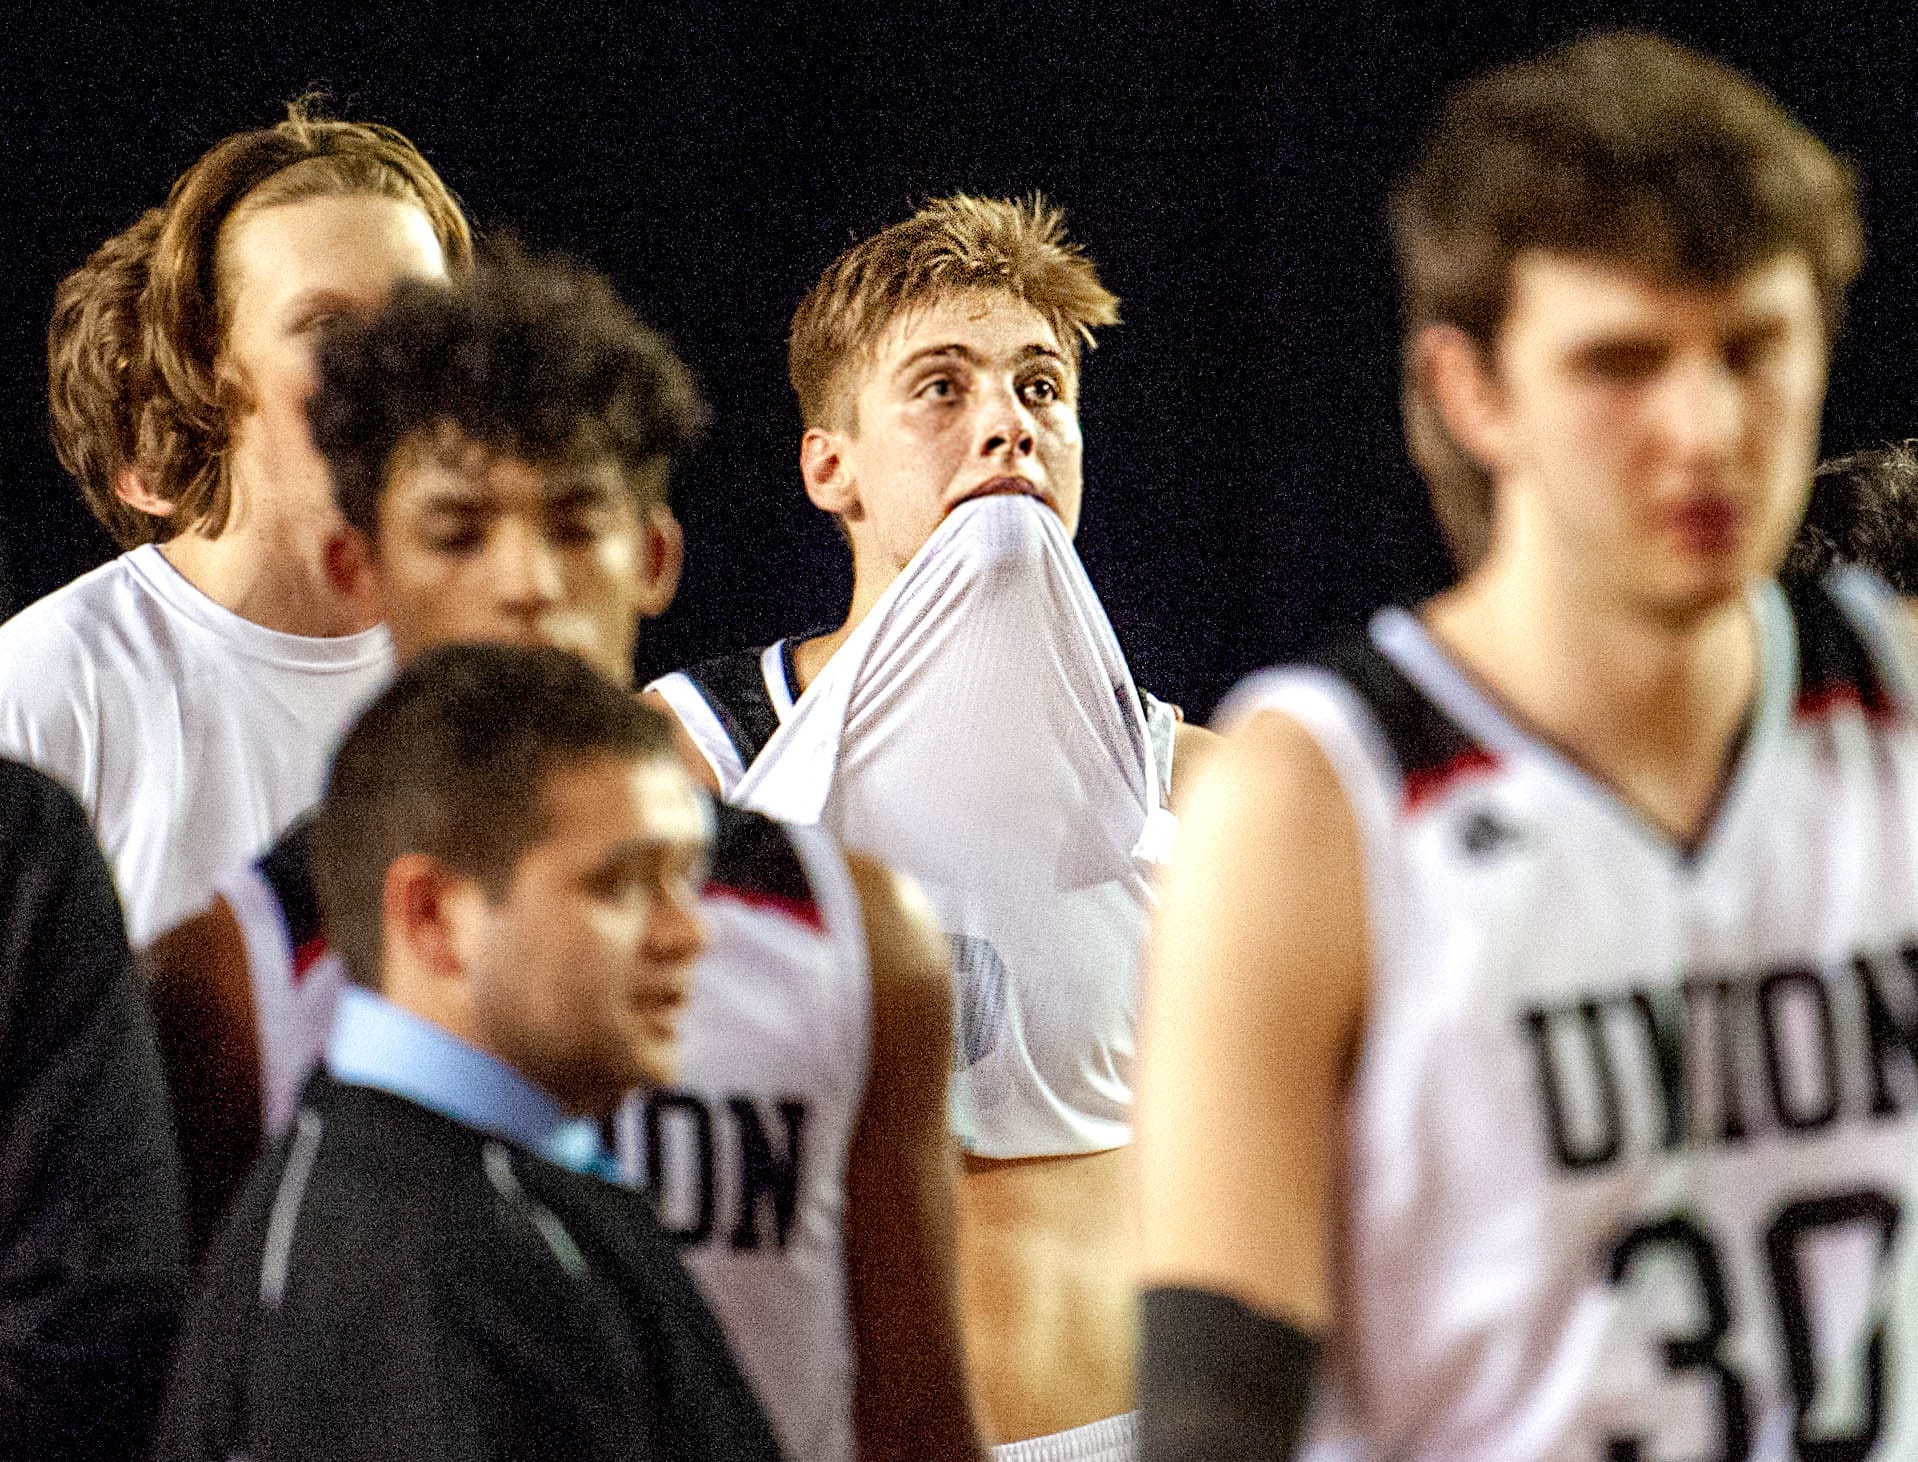 Union's Tanner Toolson stares at the scoreboard after the Titans' 63-55 defeat to Central Valley in the 4A State semifinal on Friday at the Tacoma Dome.